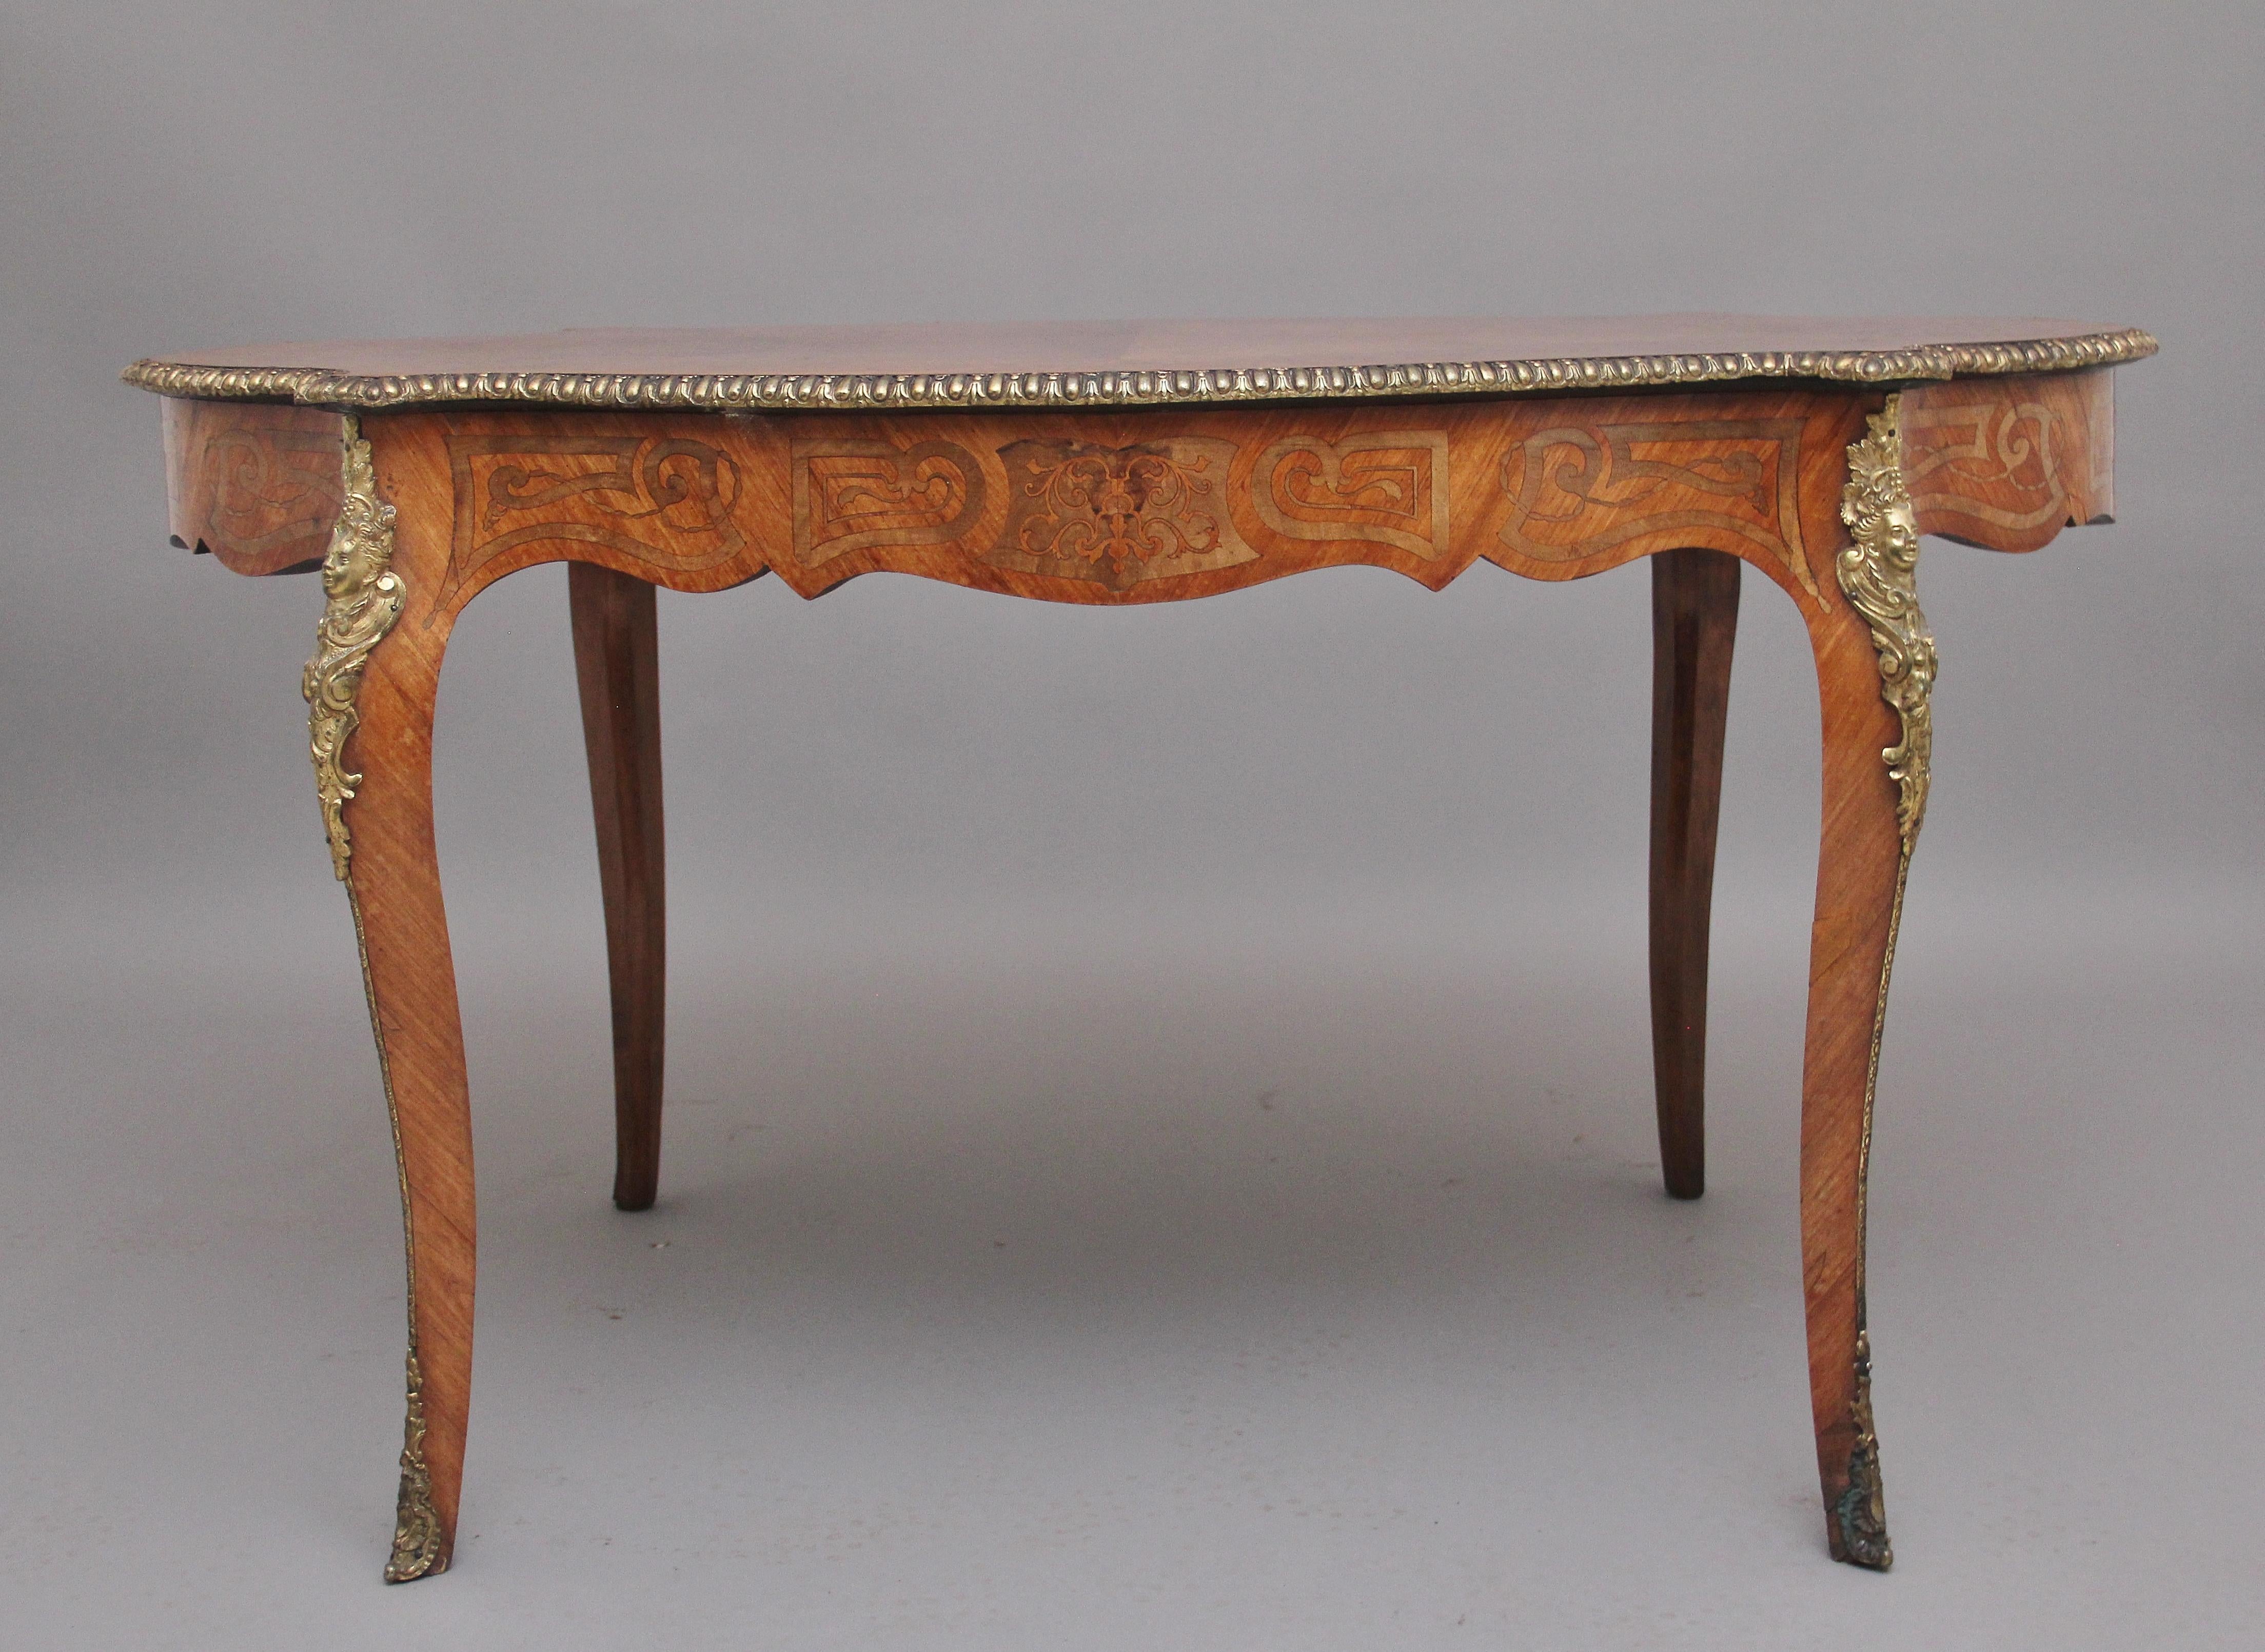 Superb Quality 19th Century Walnut and Inlaid Centre Table In Good Condition For Sale In Martlesham, GB